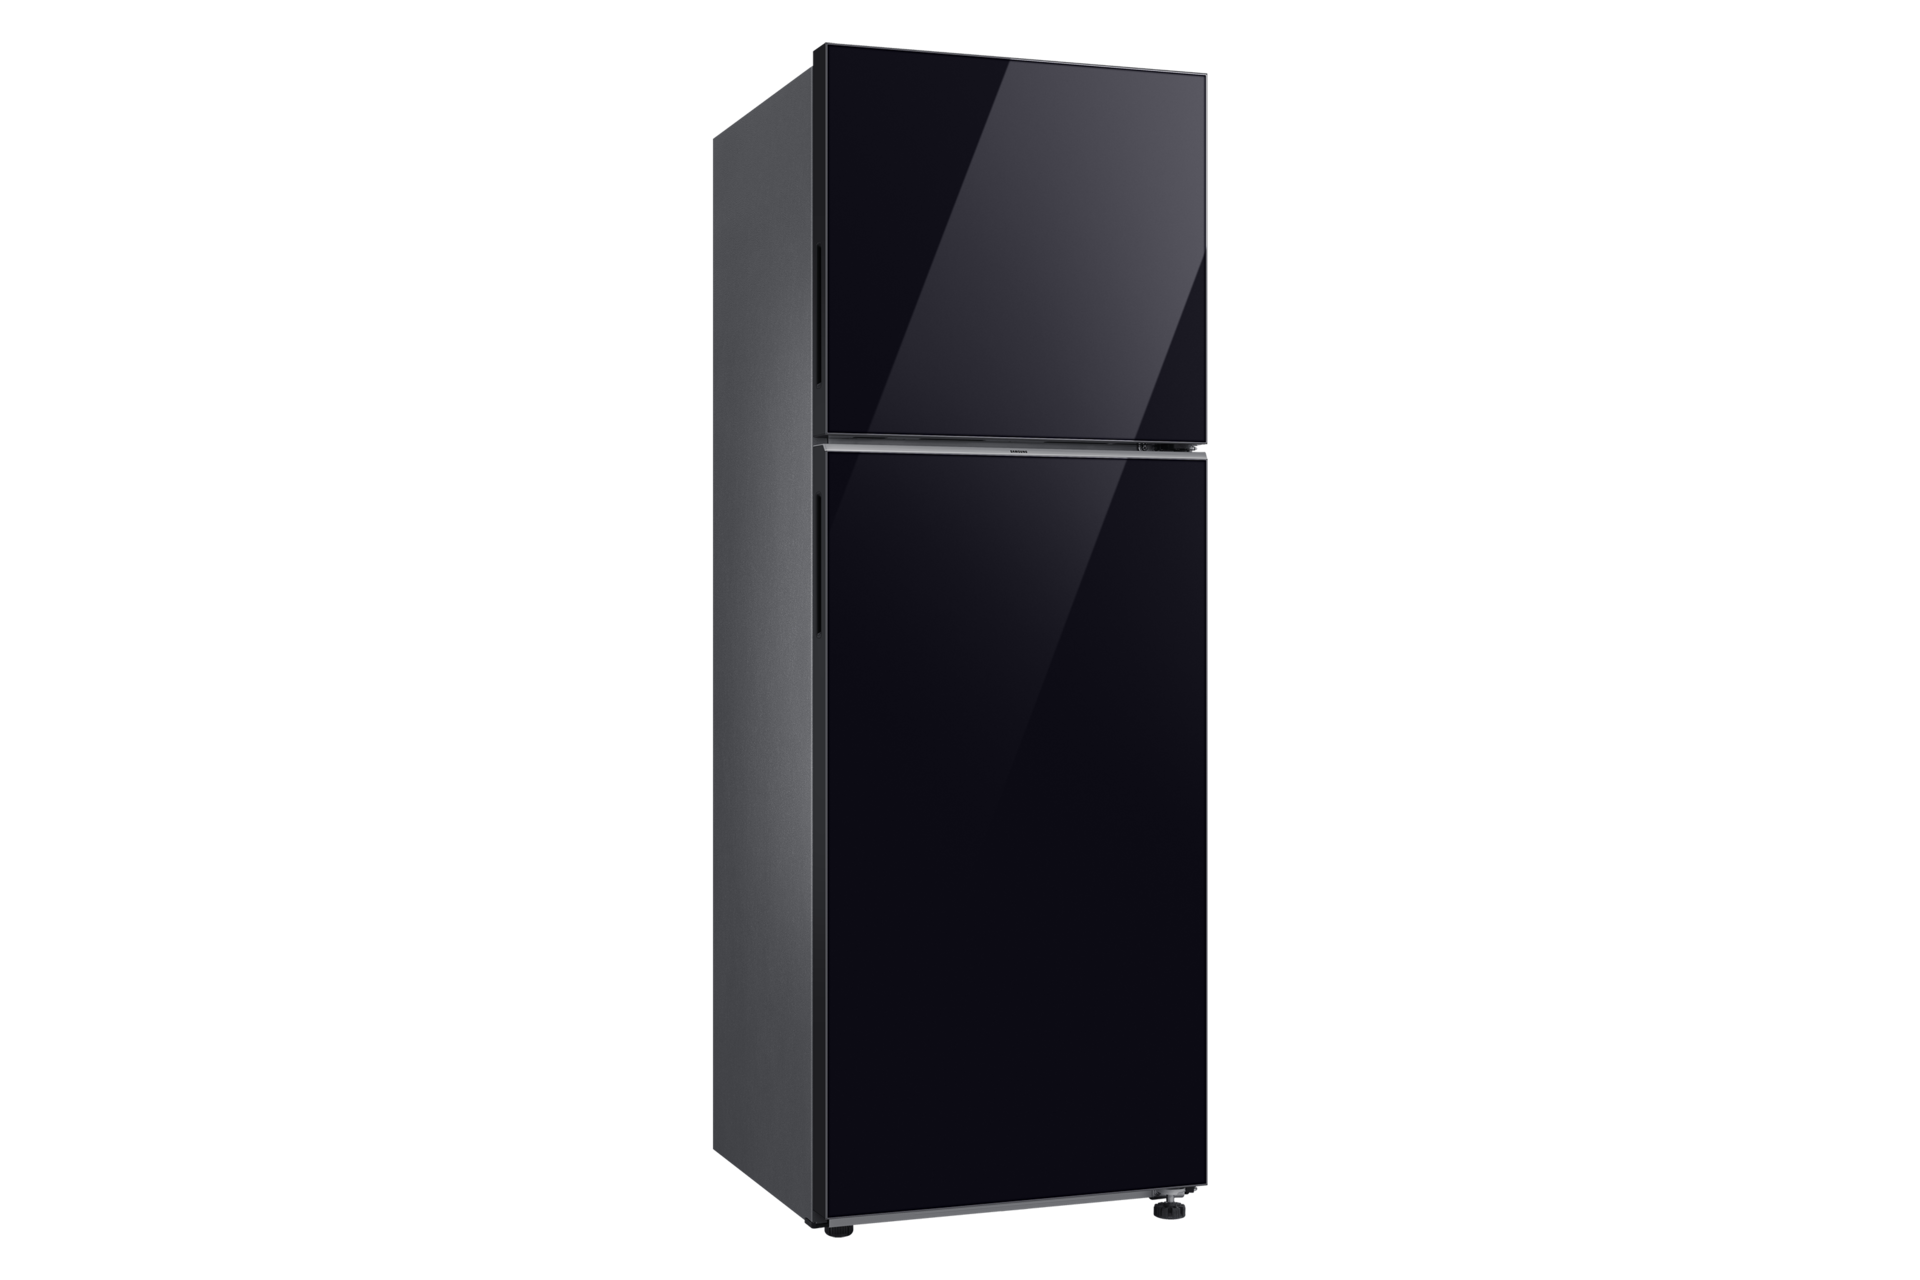 Bespoke Top Mount Freezer Refrigerator with AI Energy in Clean Black, 10.8 cu.ft